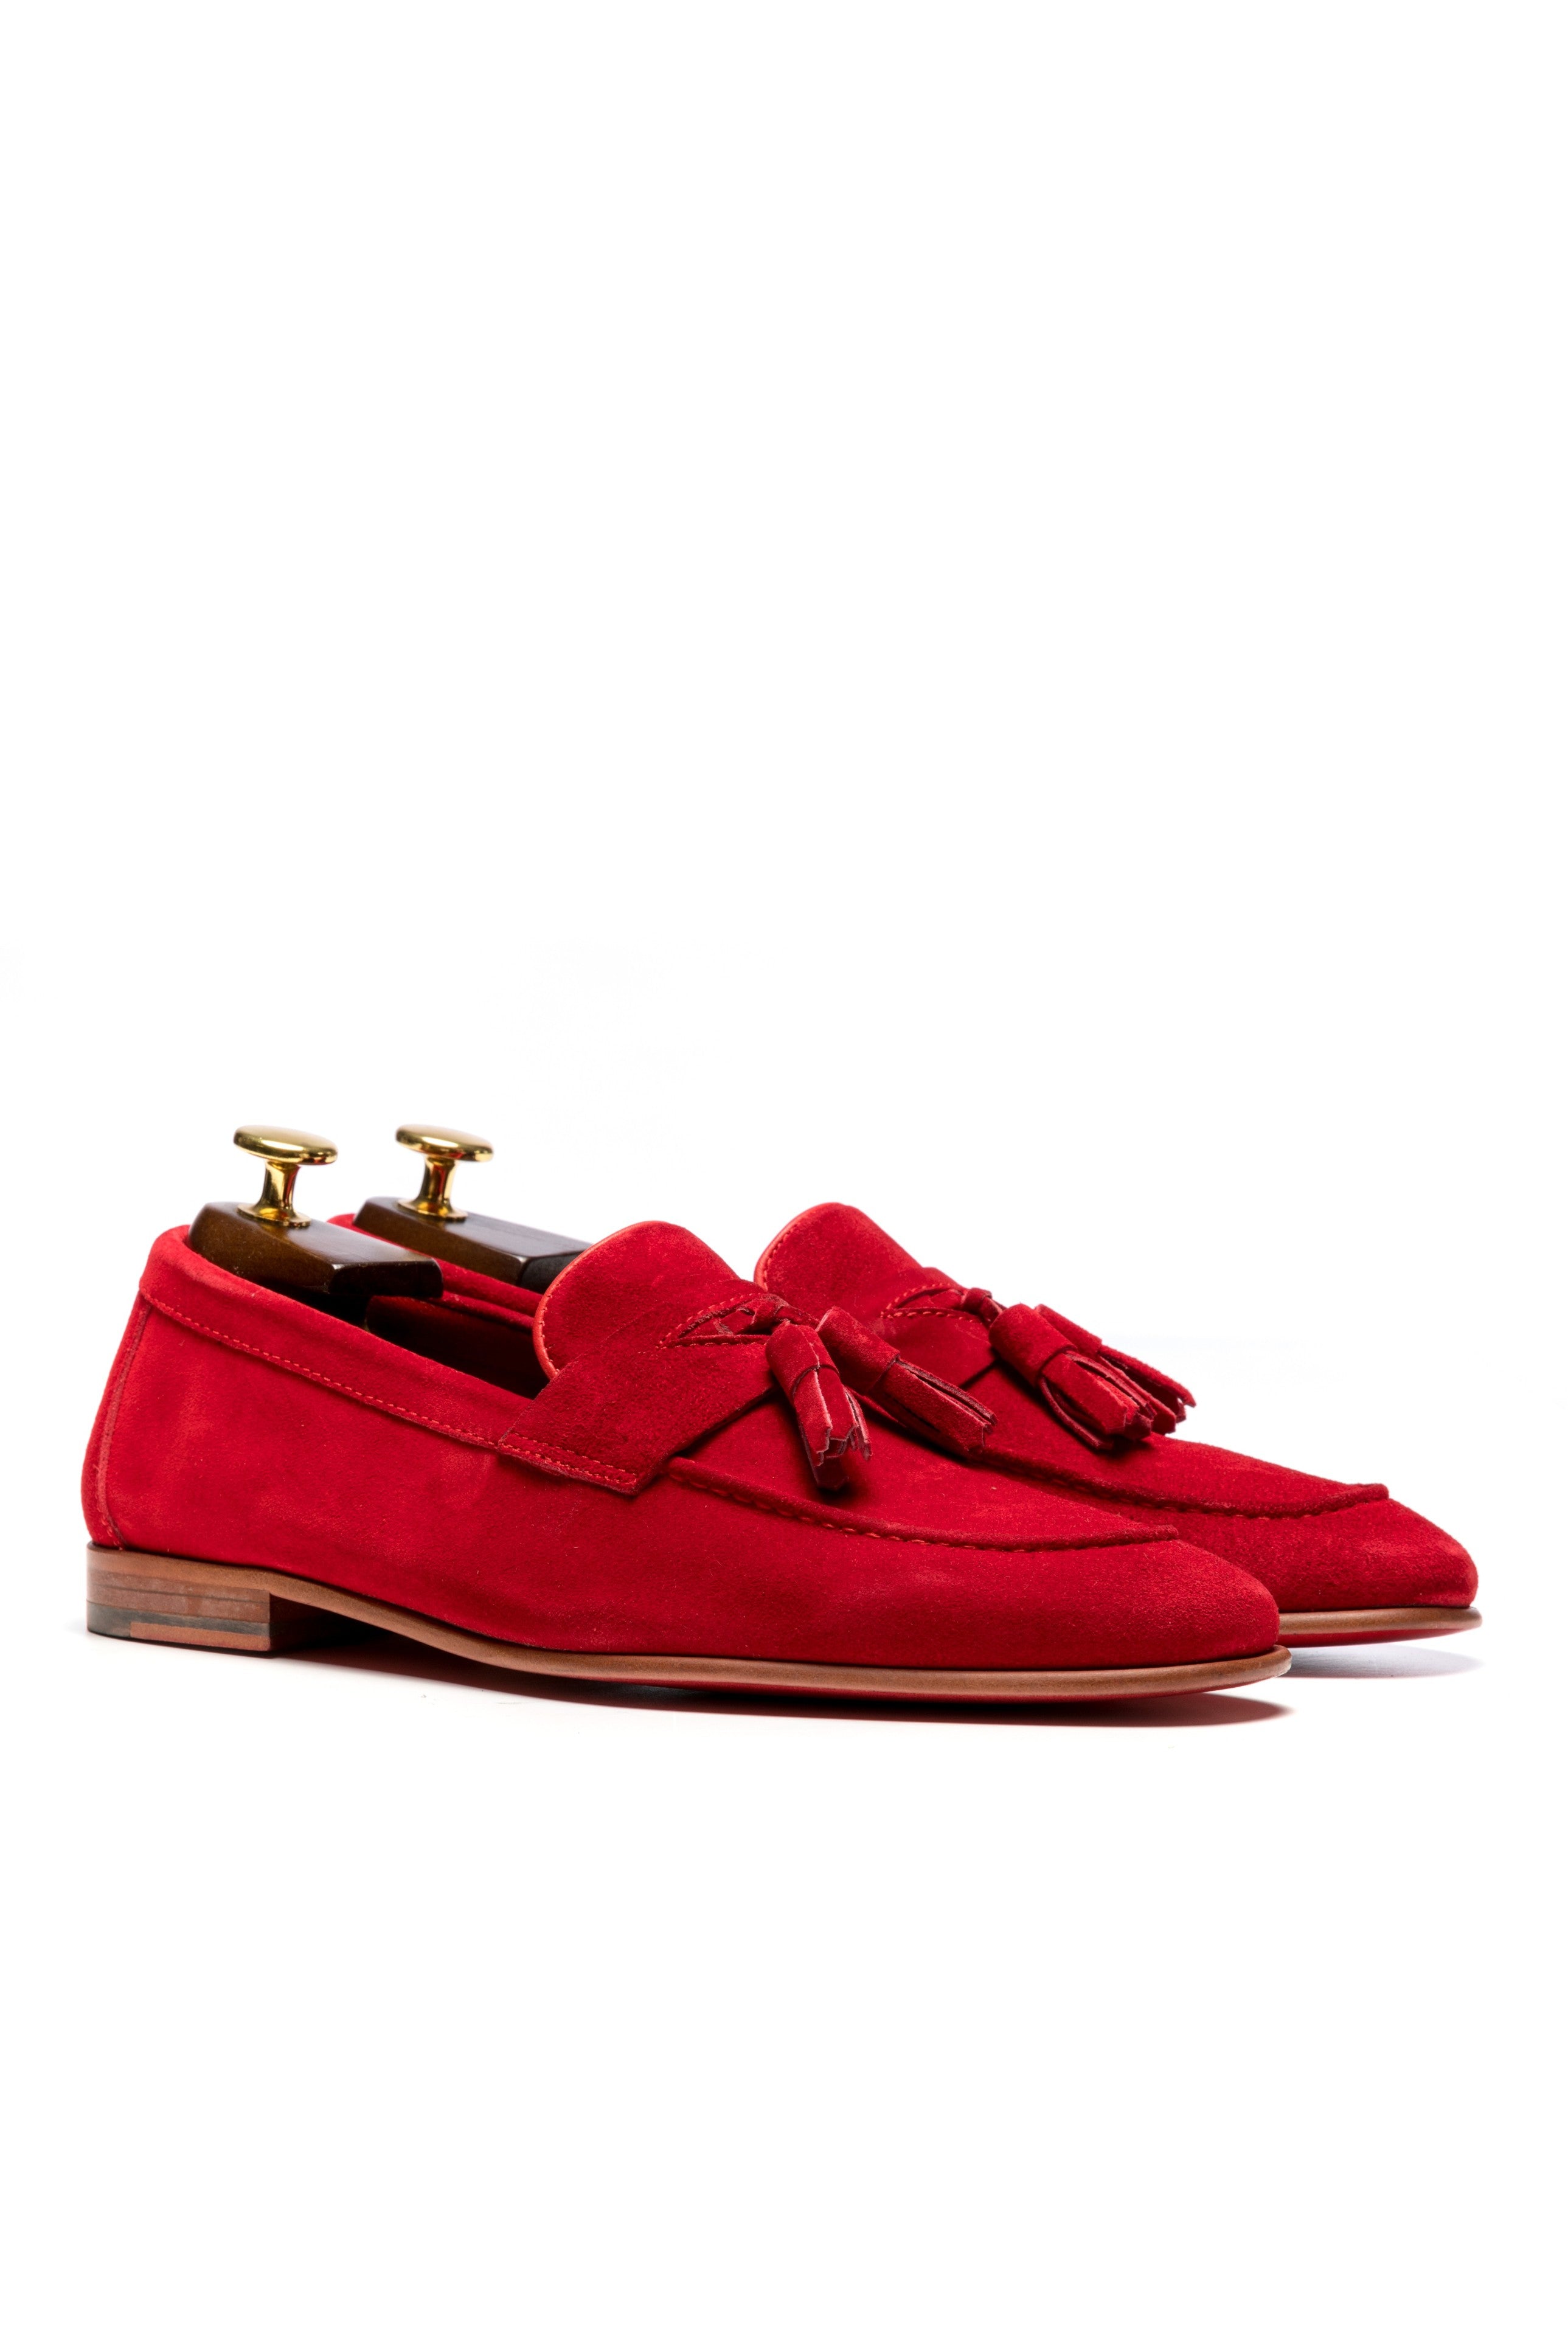 Red suede moccasins